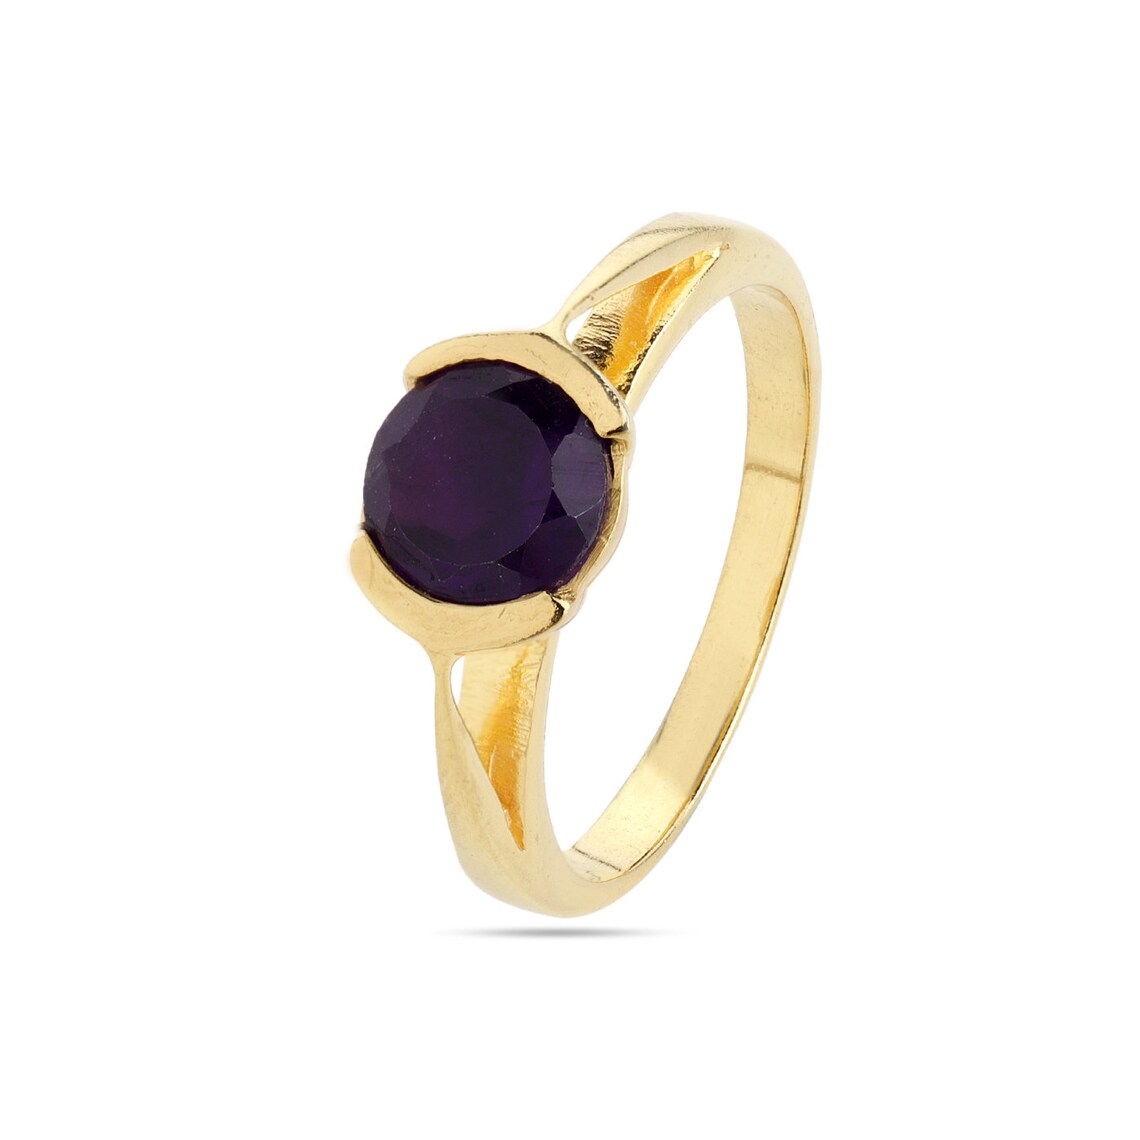 Round Amethyst Gold Ring, Amethyst 925 Sterling Silver Ring